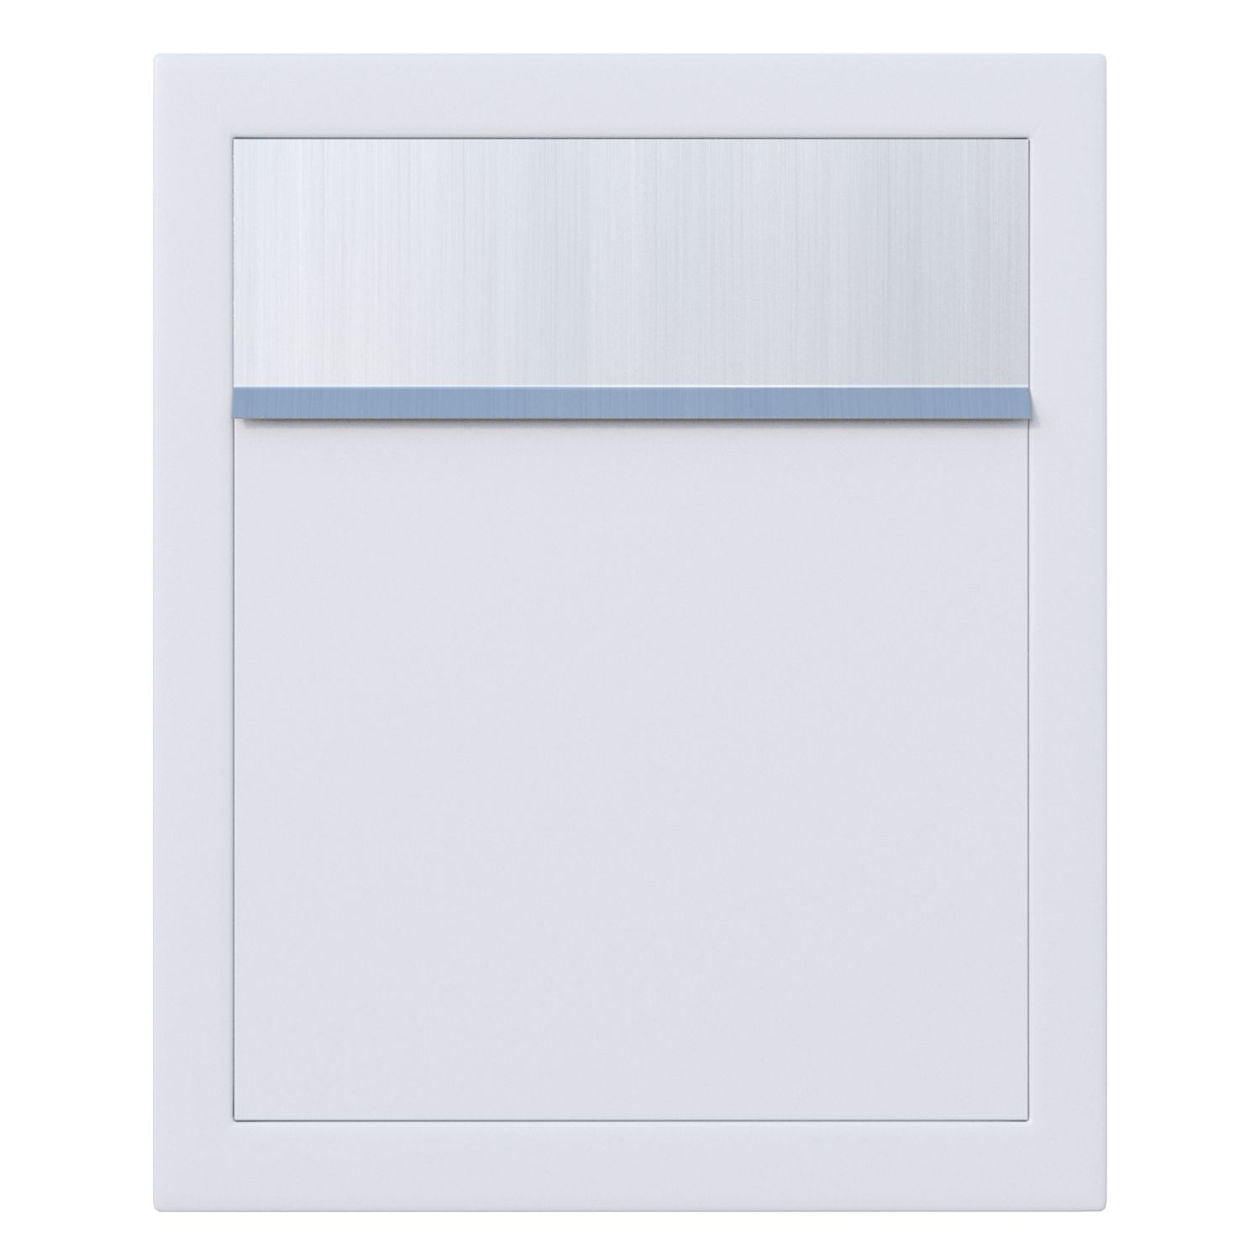 BASE by Bravios - Modern wall-mounted white mailbox with stainless steel flap